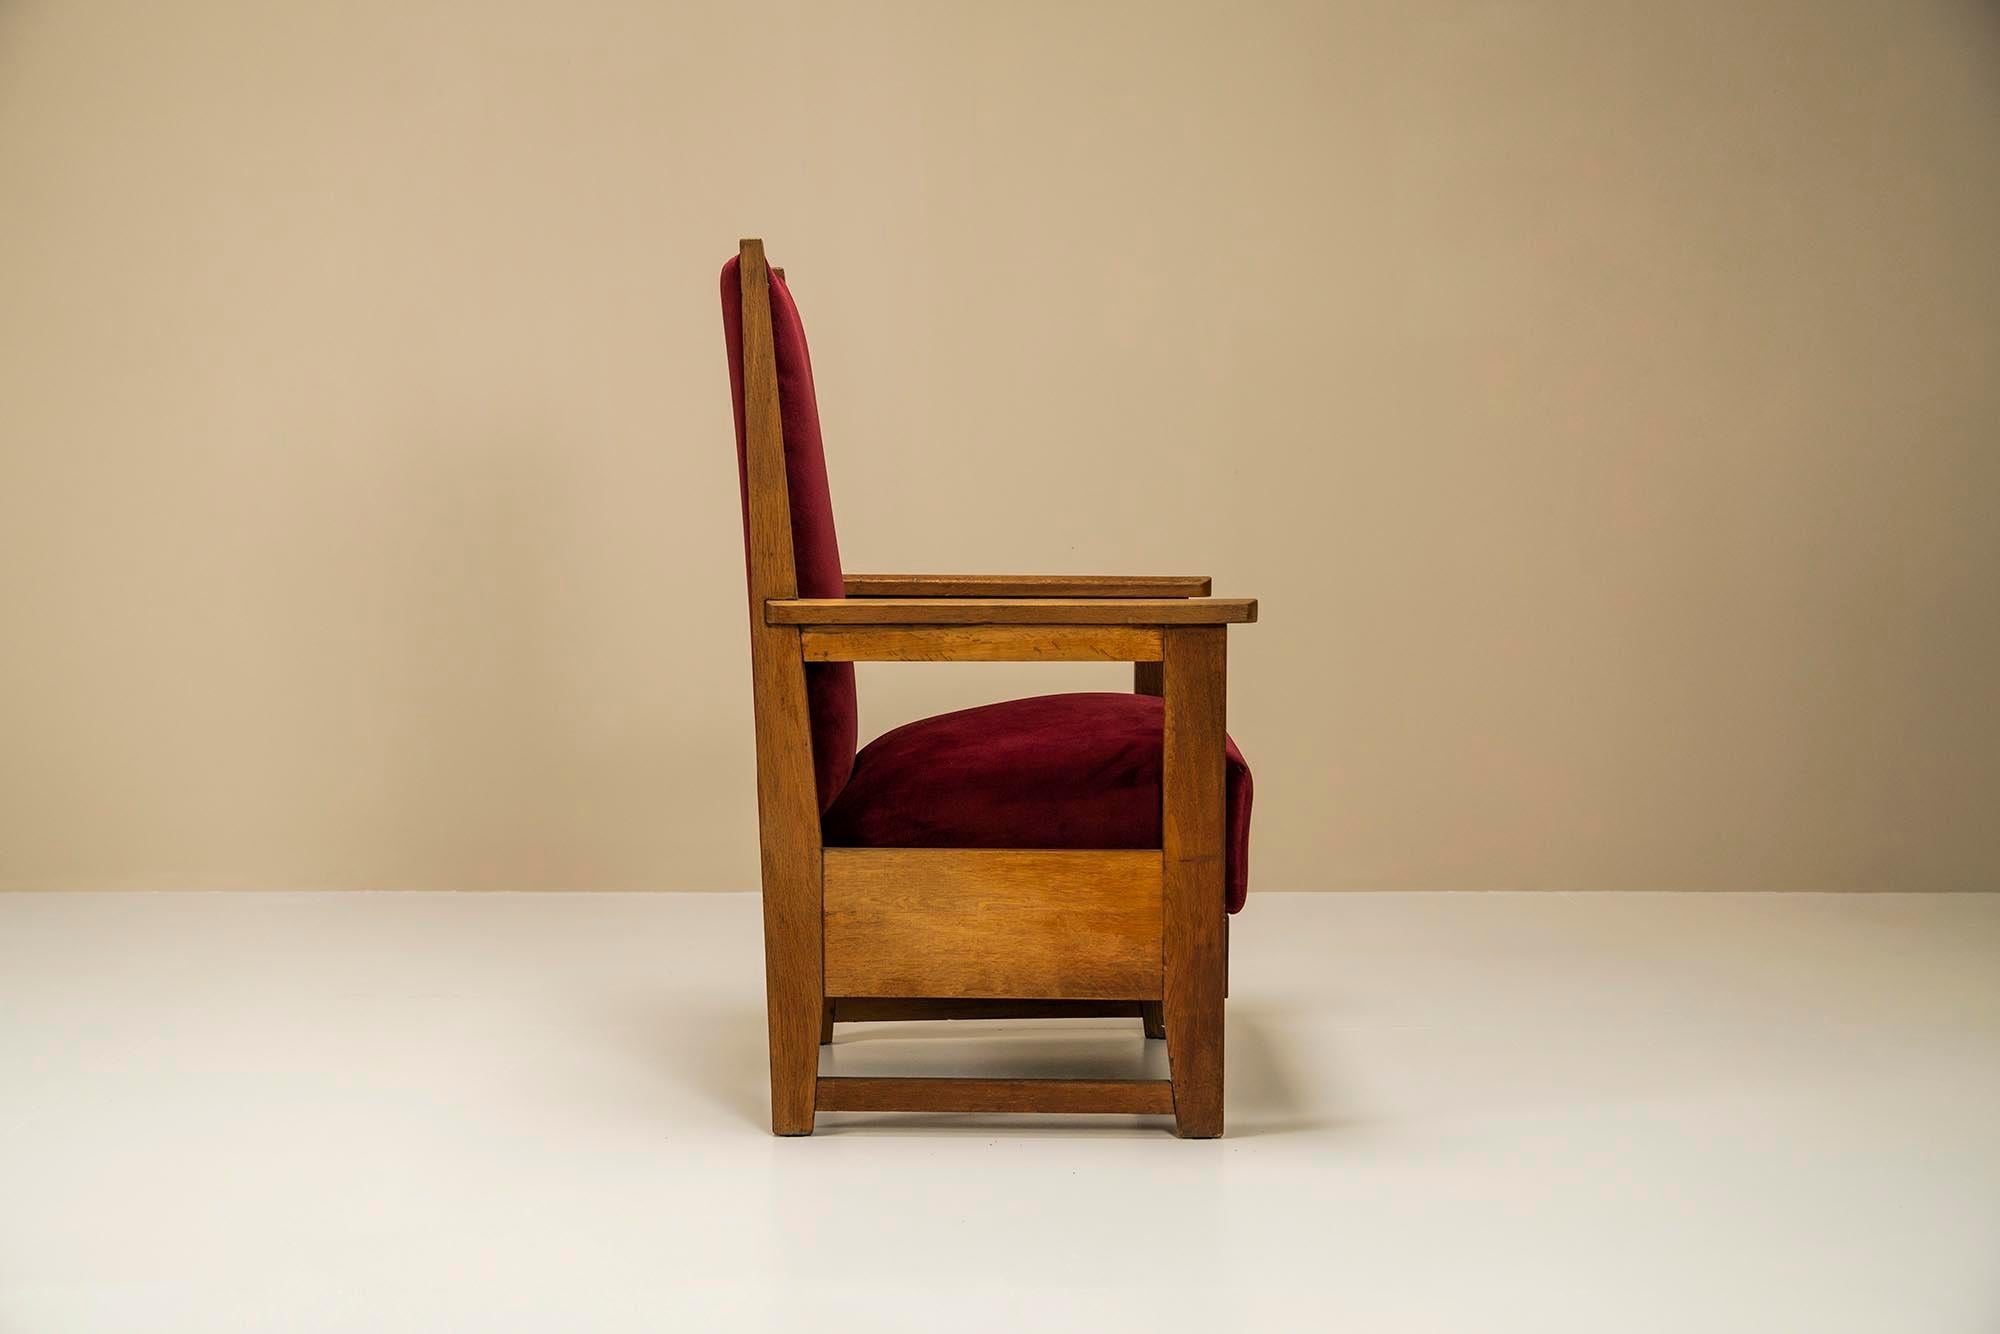 Art Deco Two Amsterdam School High Back Chairs in Oak and Burgundy, Netherlands 1930s For Sale